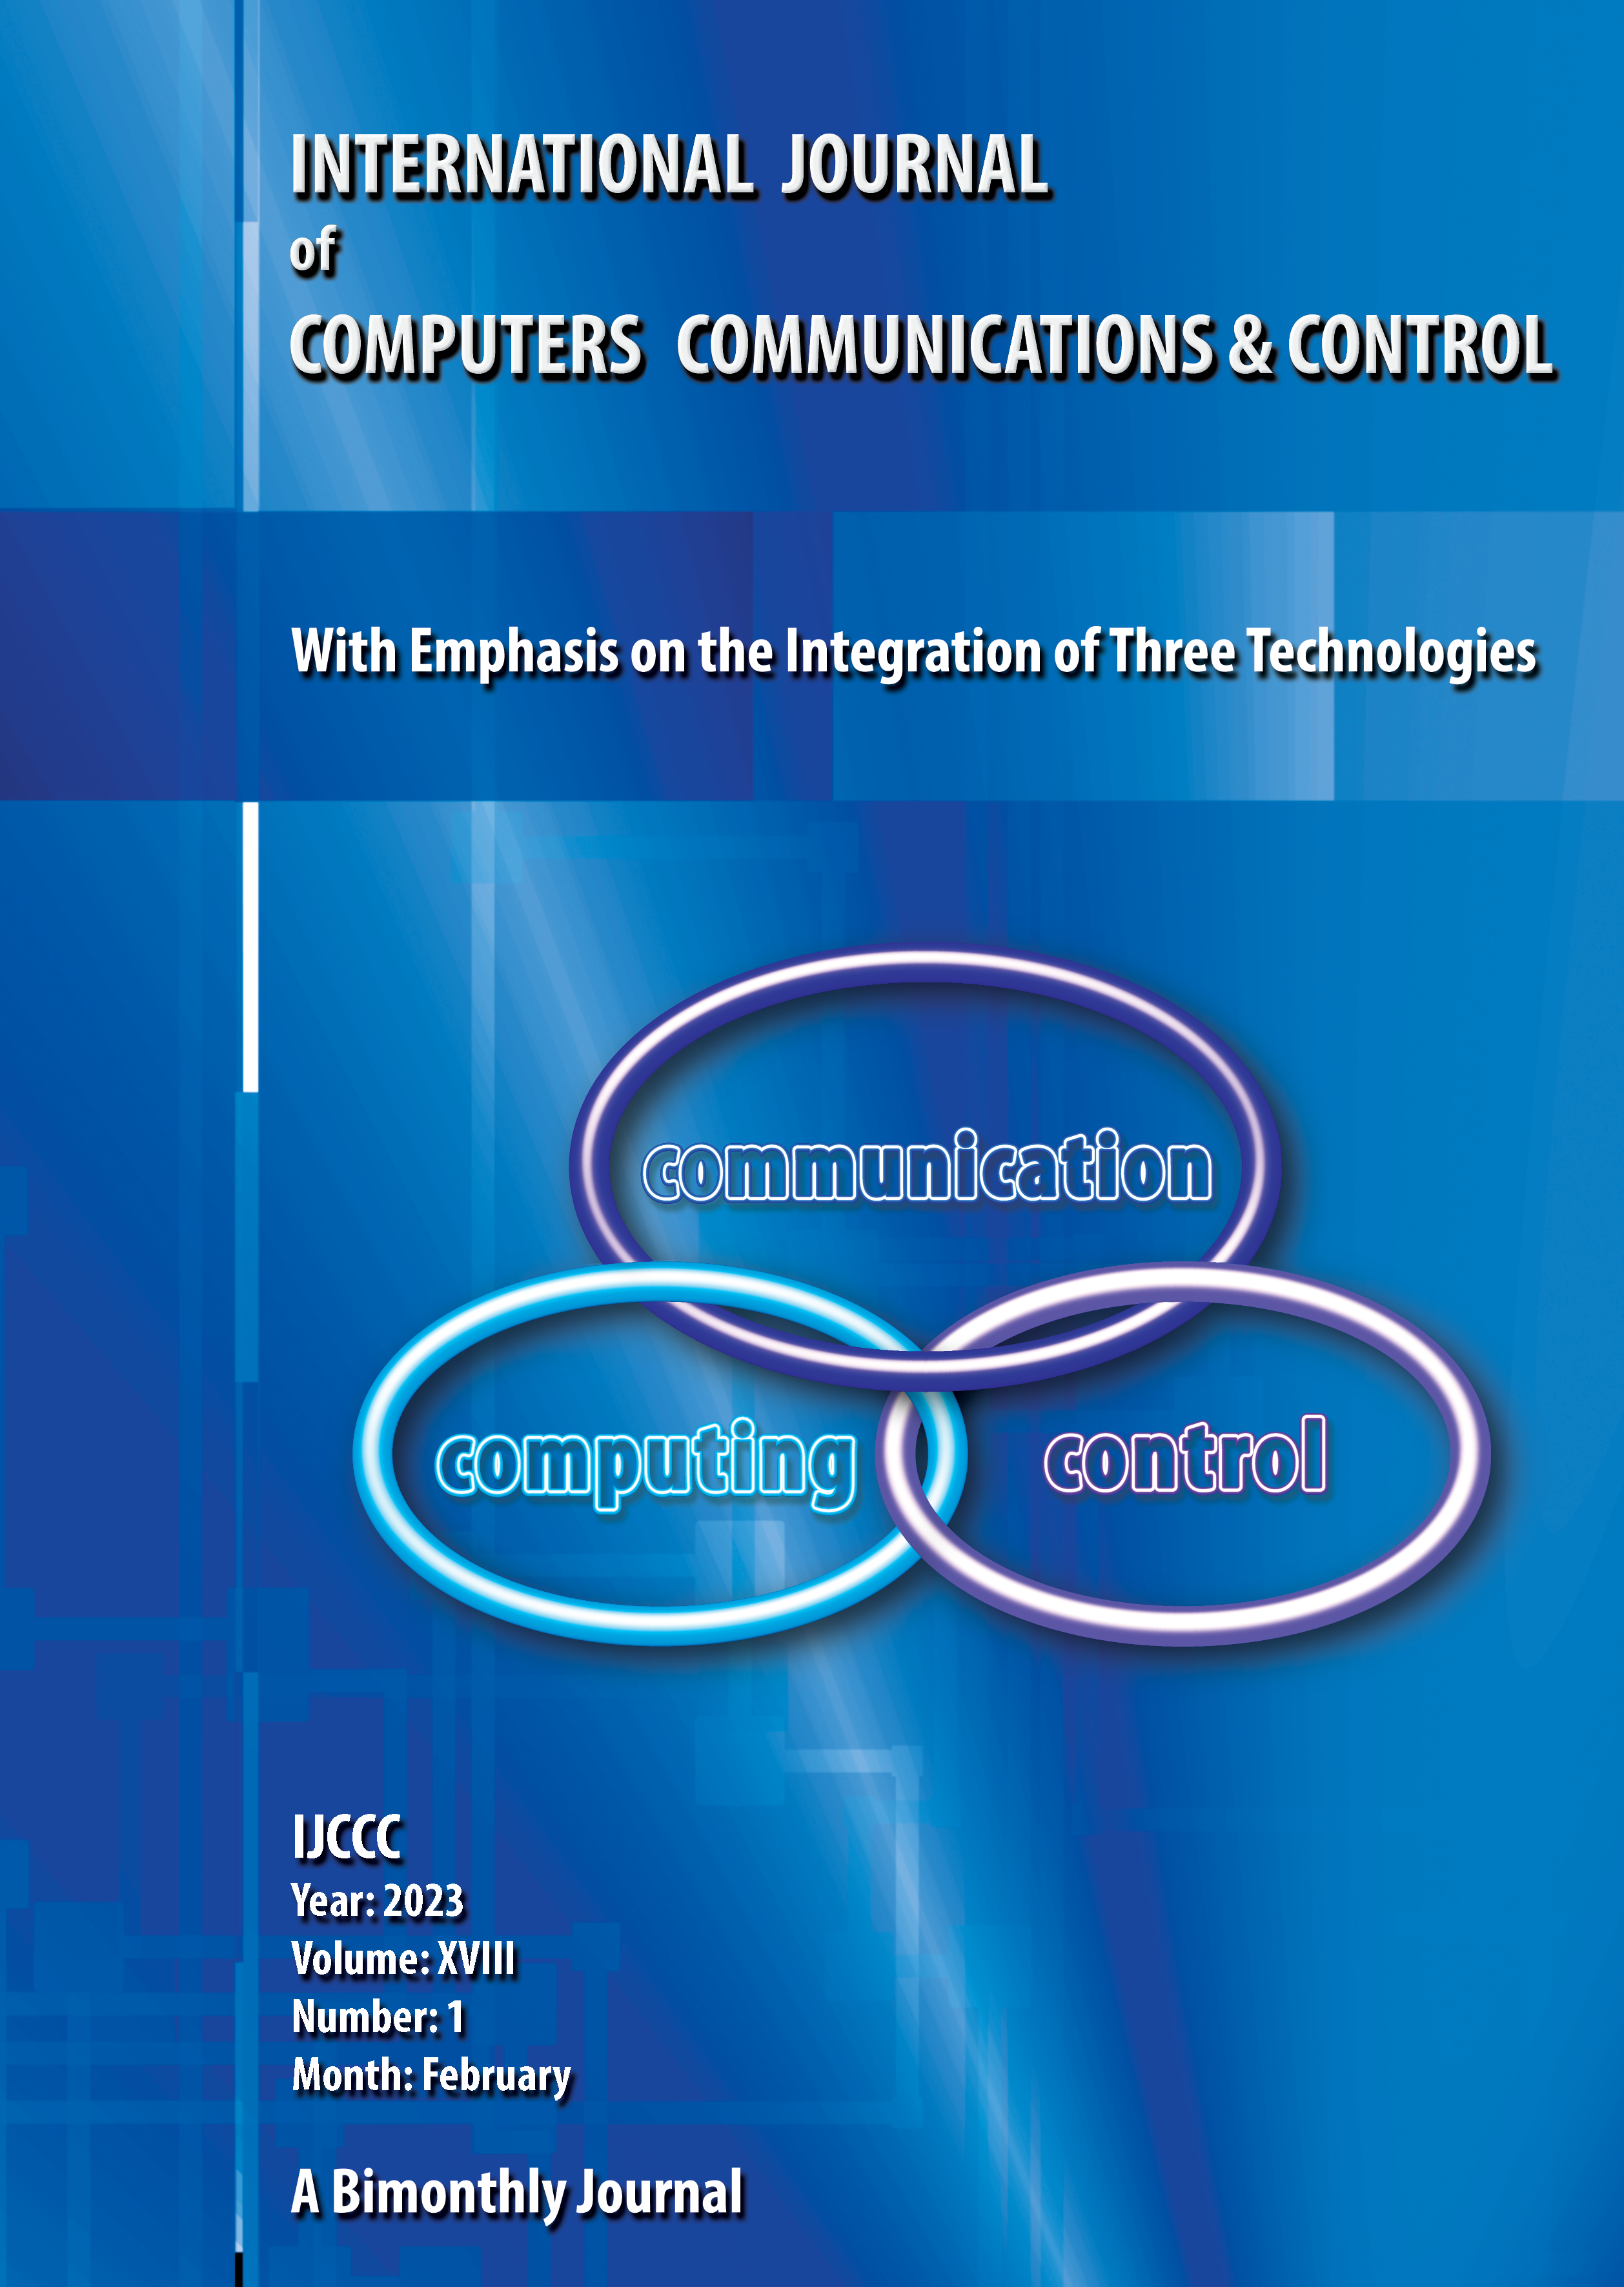 					View Vol. 18 No. 1 (2023): International Journal of Computers Communications & Control (February)
				